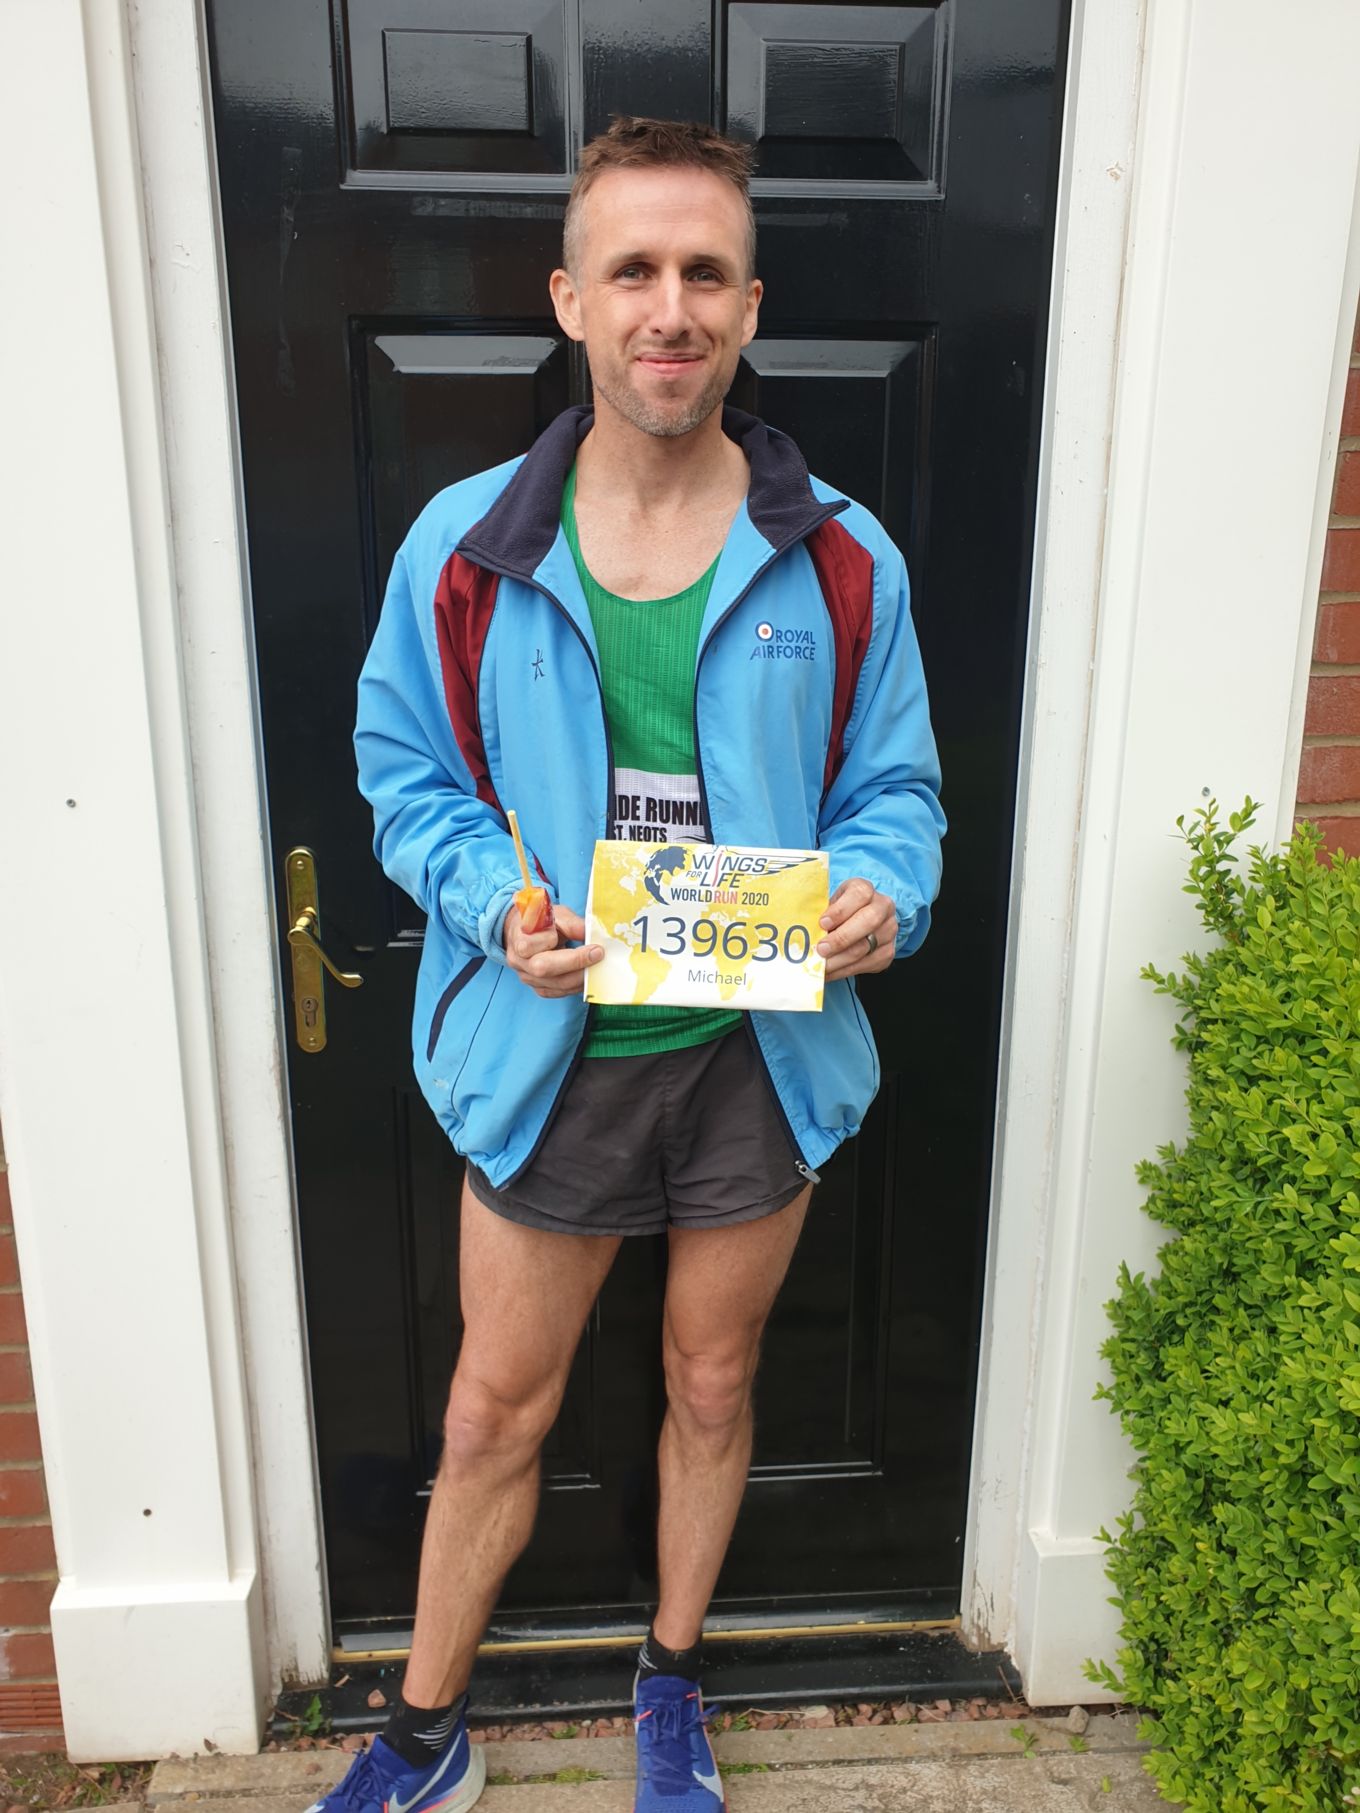 FS Taylor pictured with his race number after running 43.4 miles